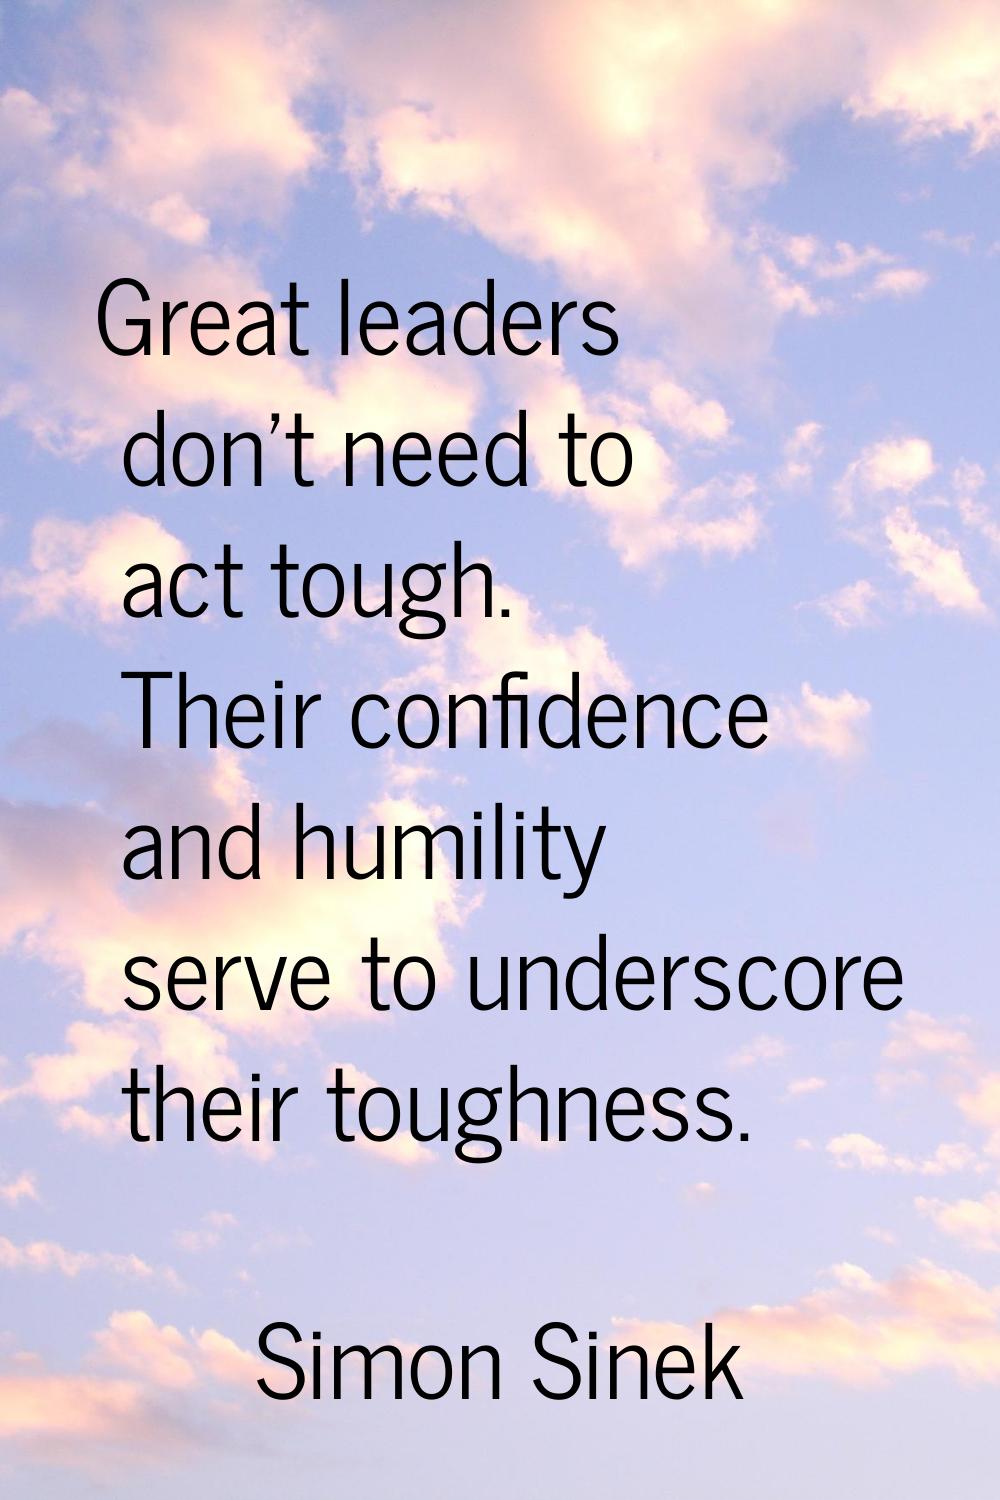 Great leaders don't need to act tough. Their confidence and humility serve to underscore their toug